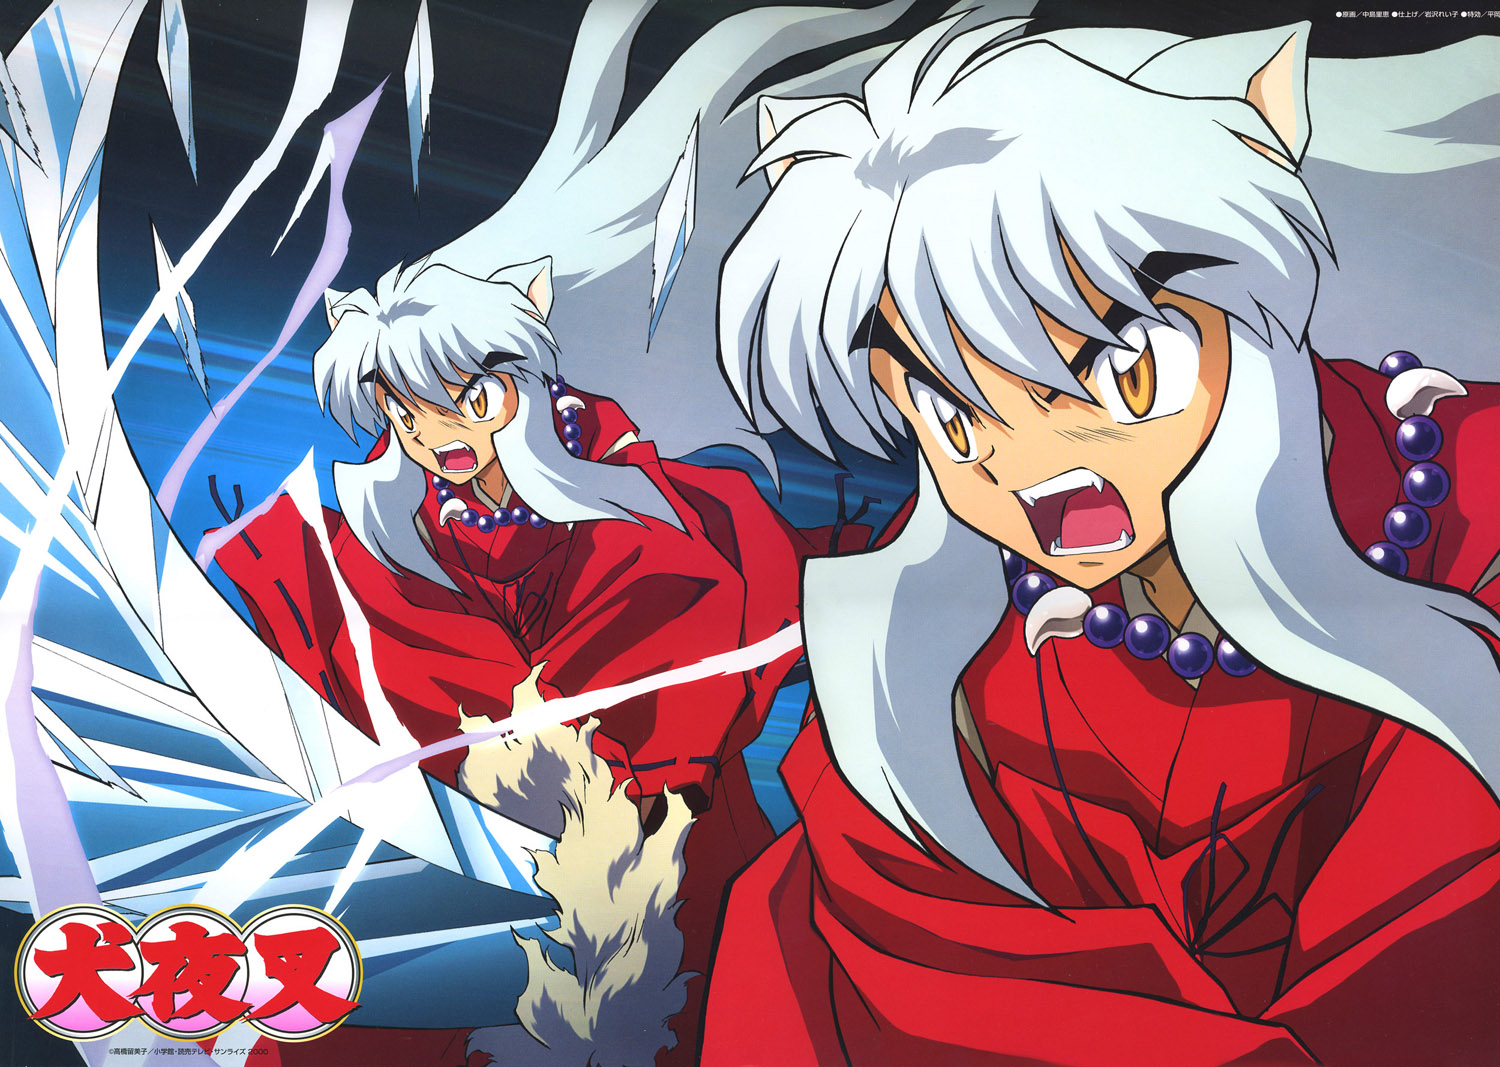 Anime of the Week: Inuyasha | The Legend of Lorie